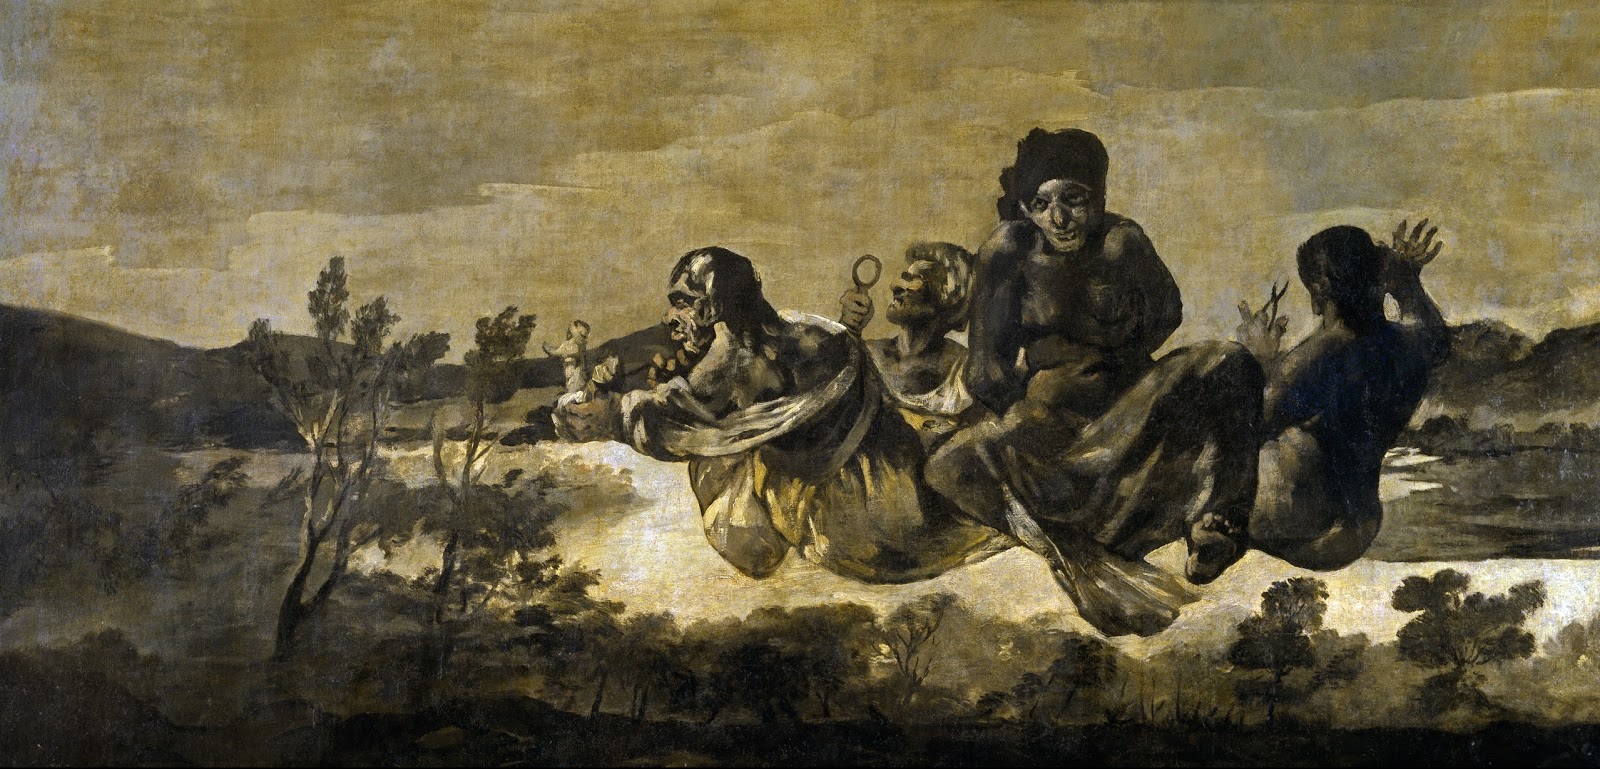 surface fragments: The Black Paintings of Goya